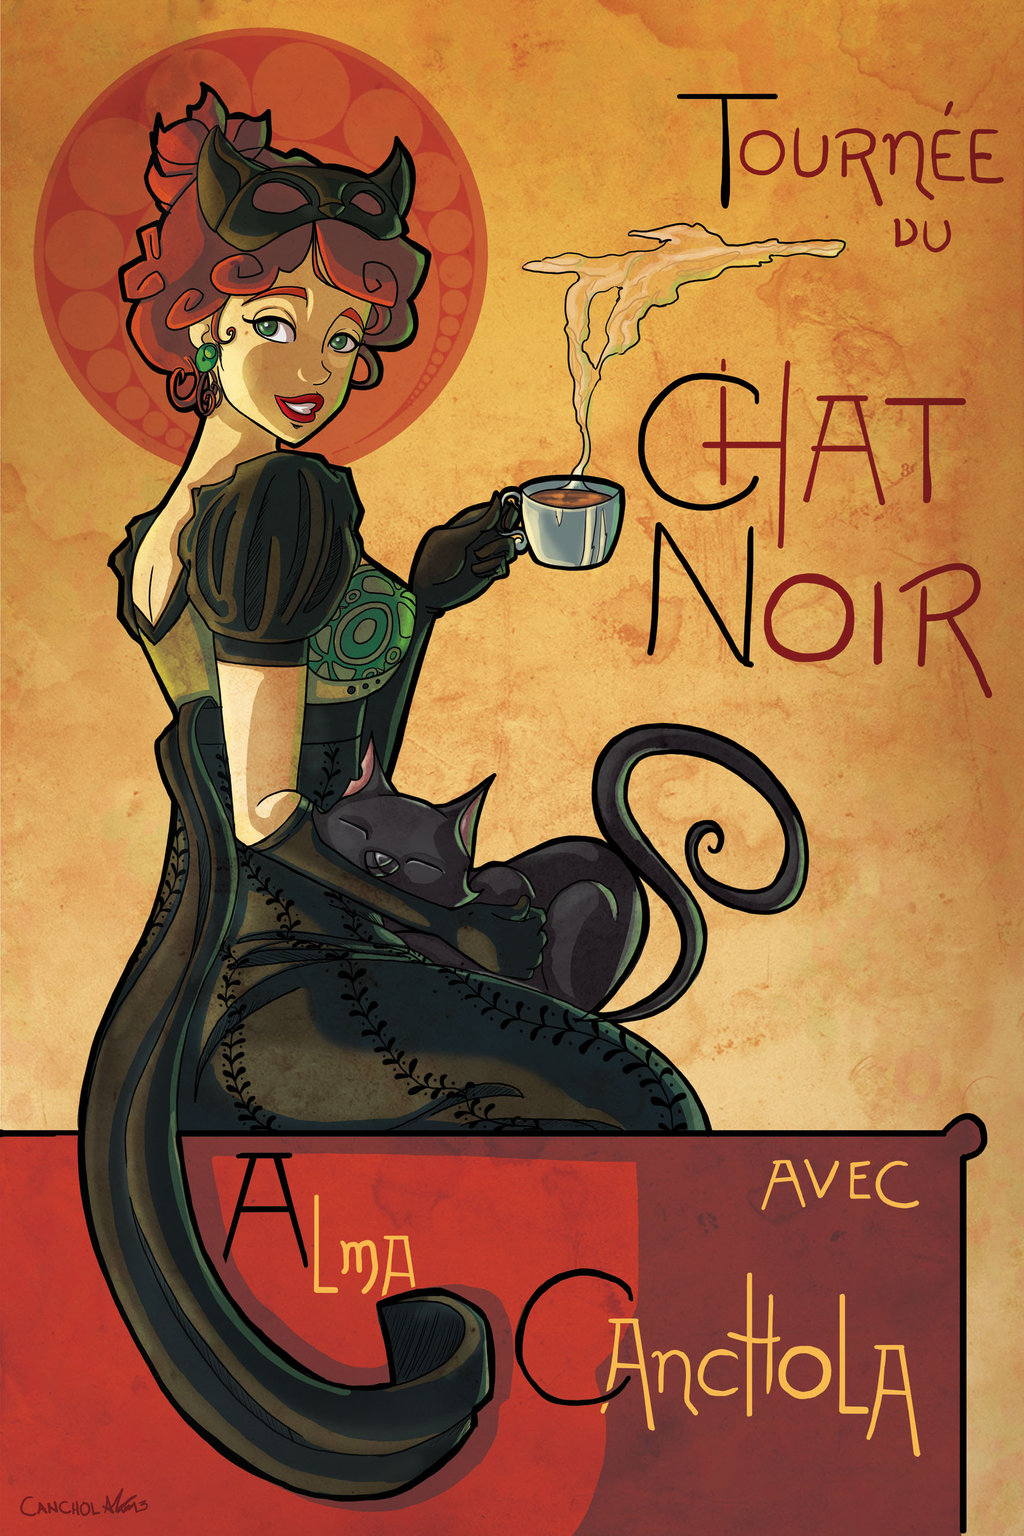 tribute_to_chat_noir_poster_by_canchola